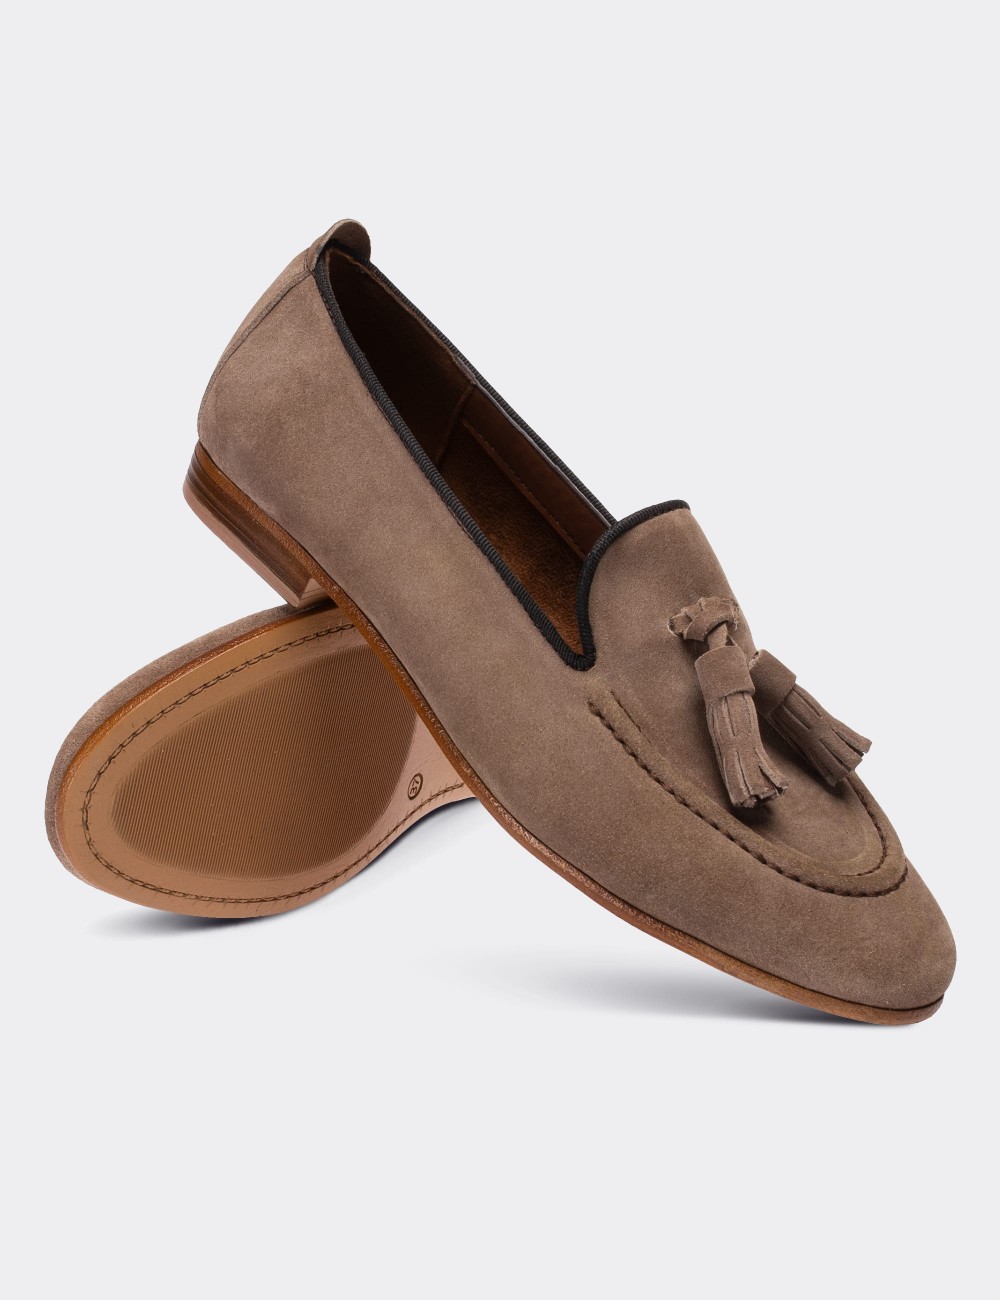 Sandstone Suede Leather Loafers - 01619ZVZNM01